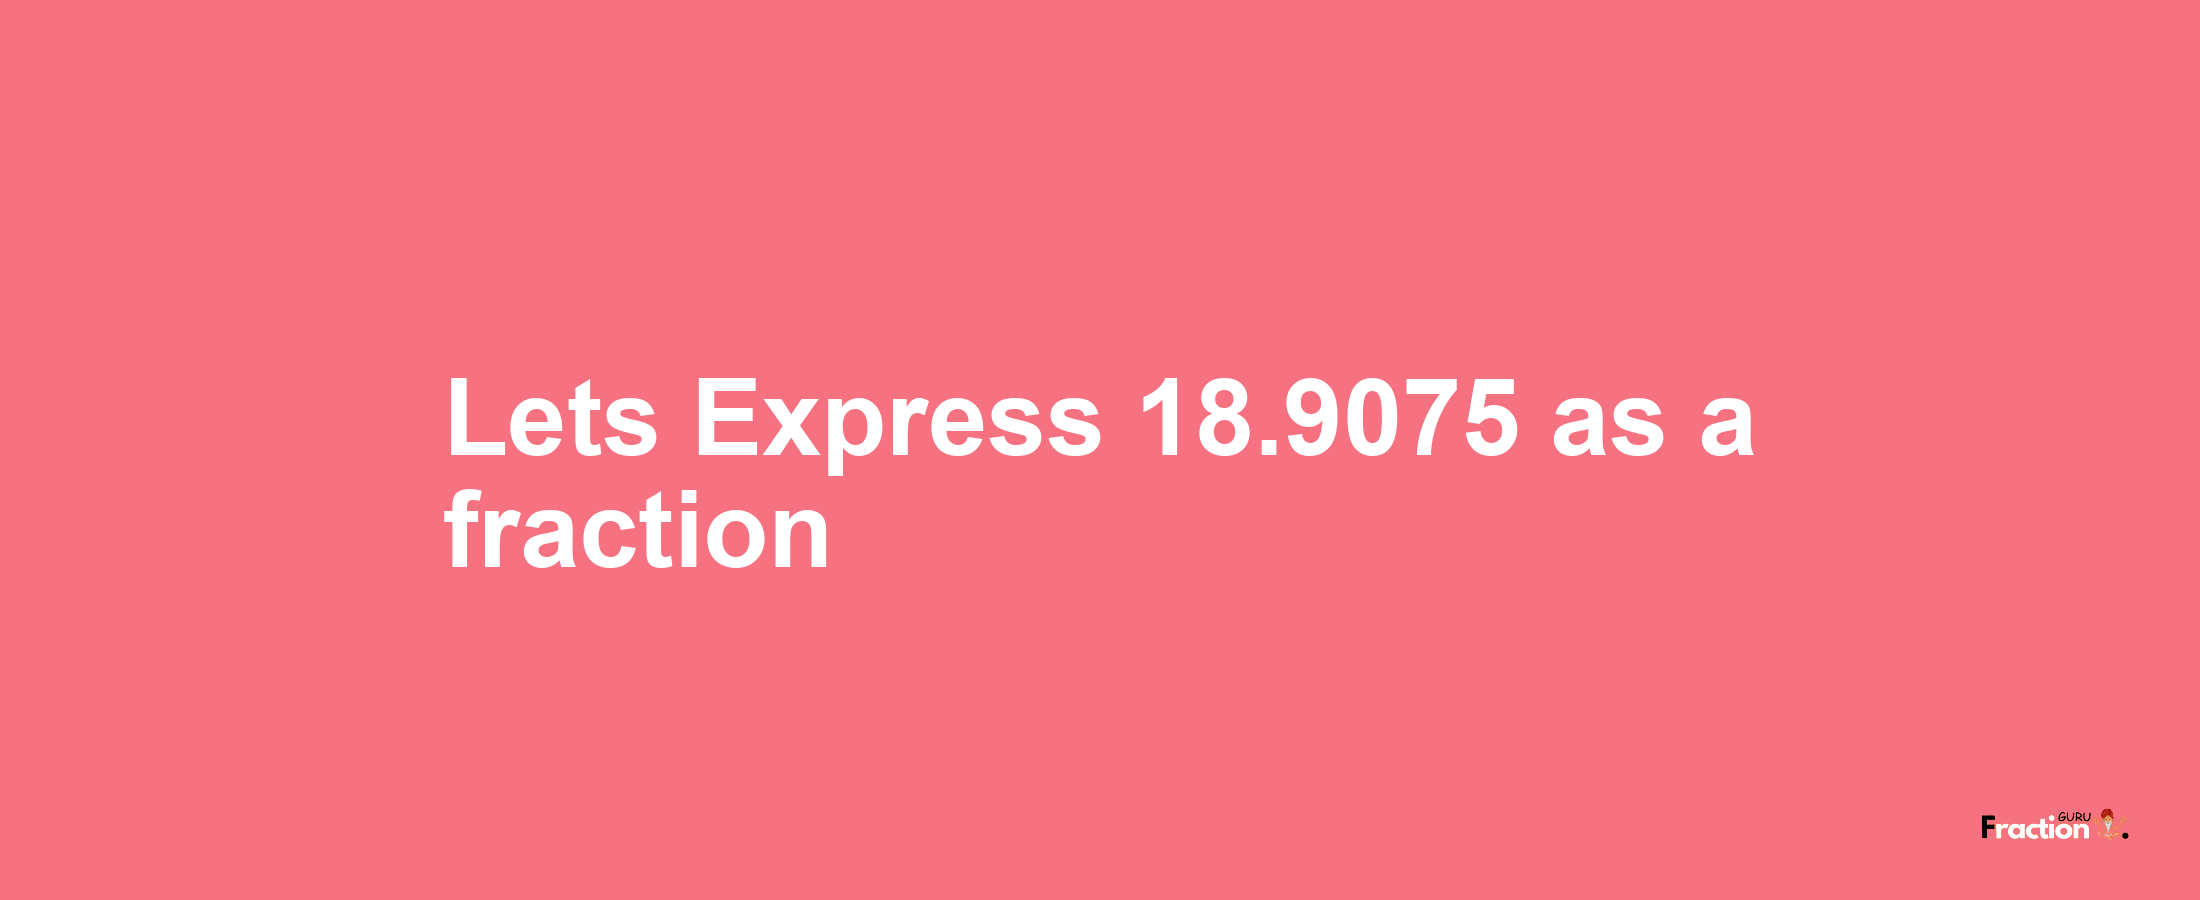 Lets Express 18.9075 as afraction